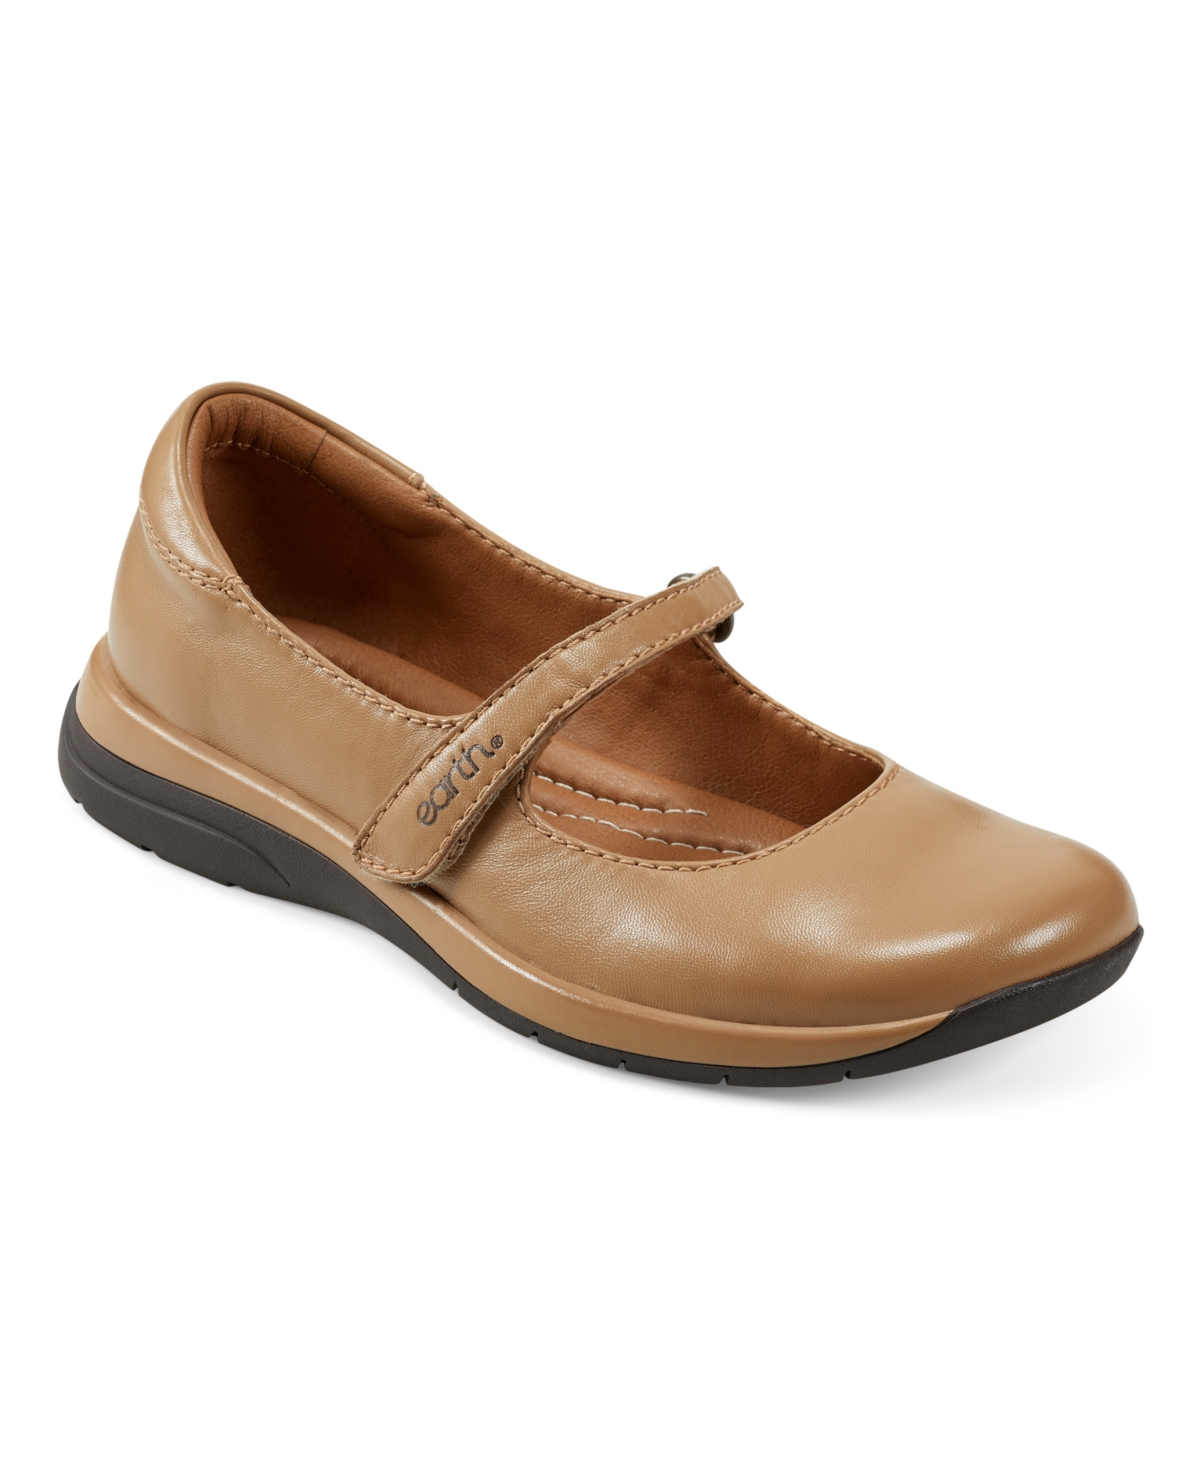 Shop Earth Women's Tose Round Toe Mary Jane Casual Ballet Flats In Medium Natural Leather